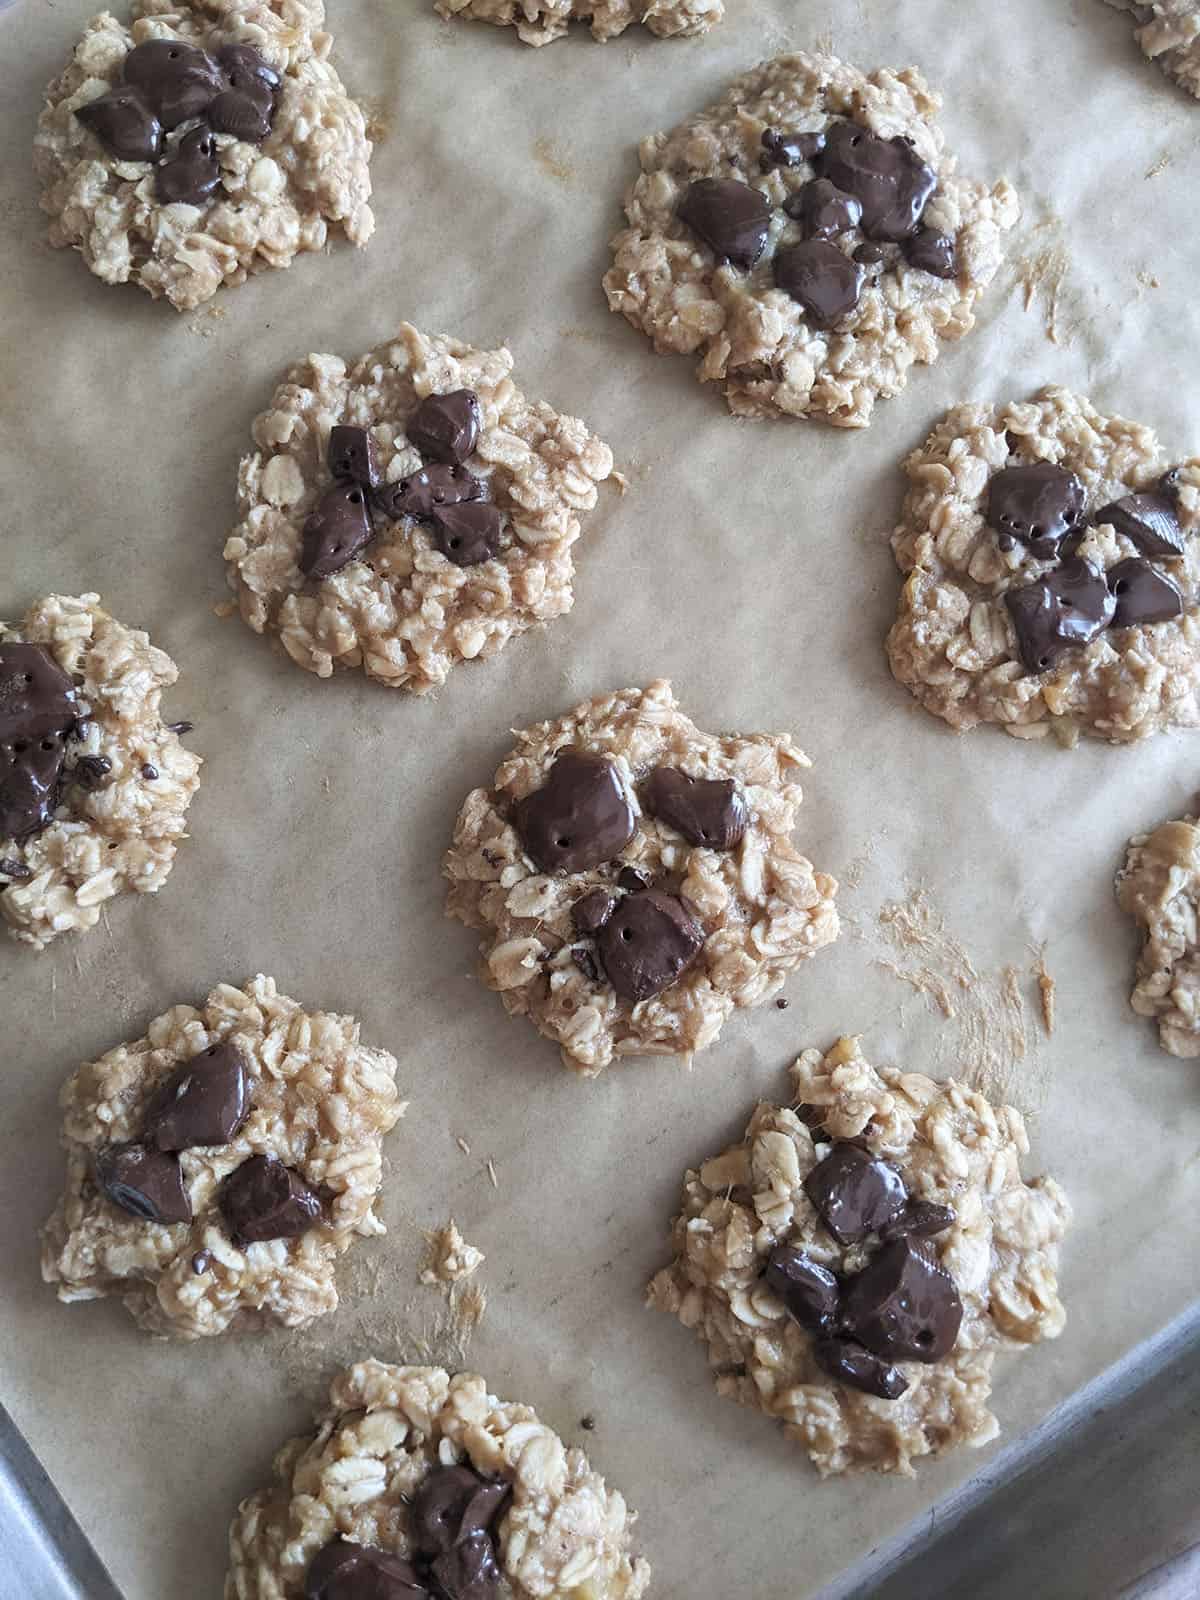 Banana oat cookies out of the oven.